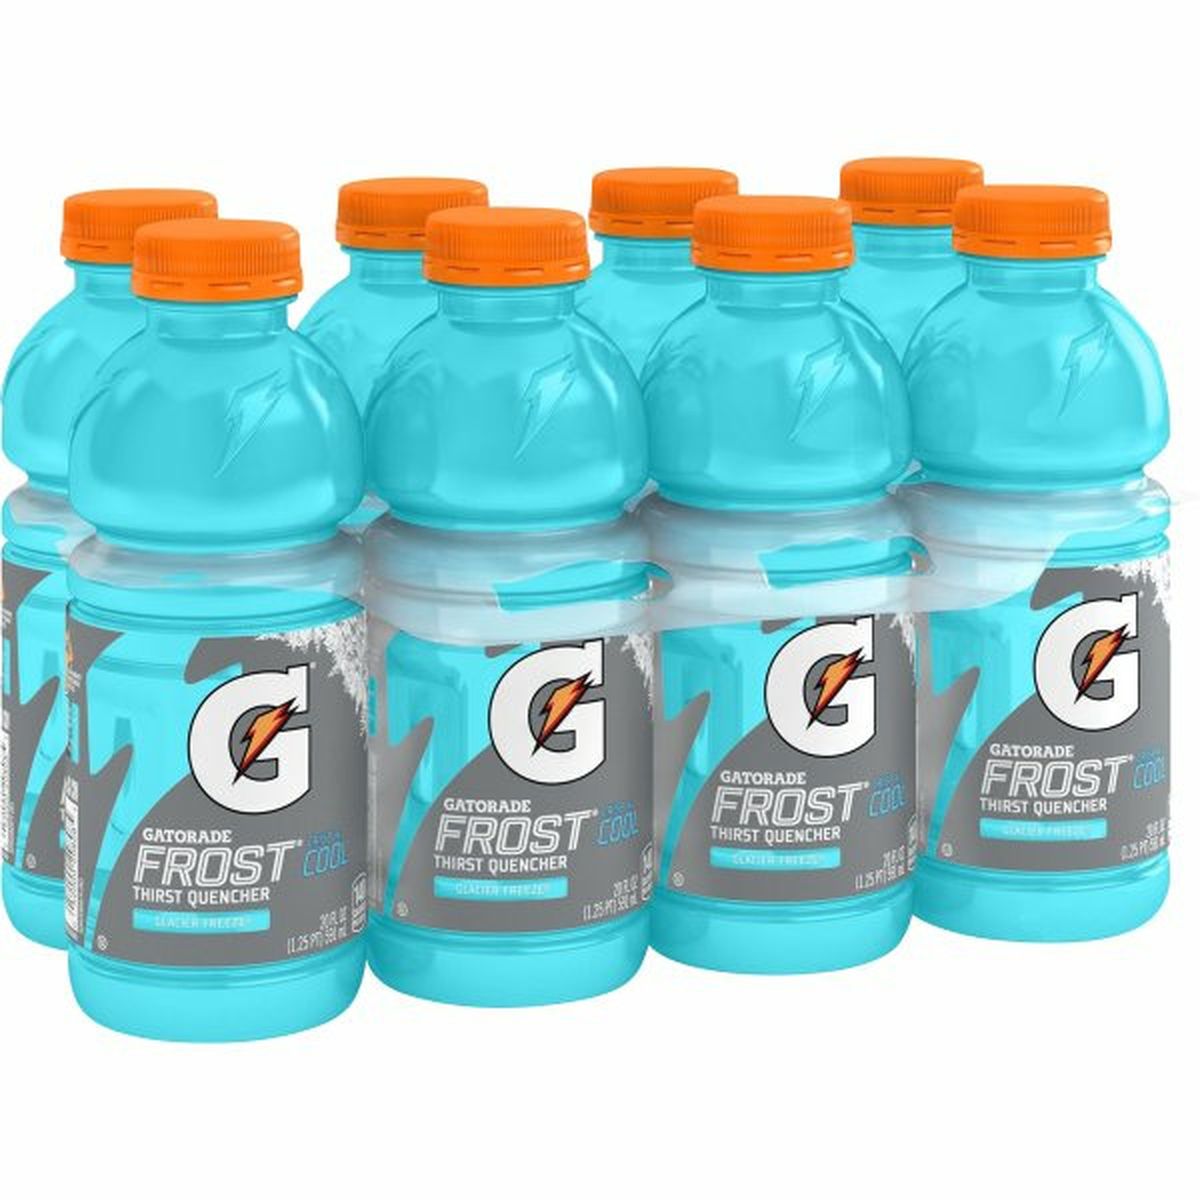 Calories in Gatorade Frost Thirst Quencher, Glacier Freeze Flavored